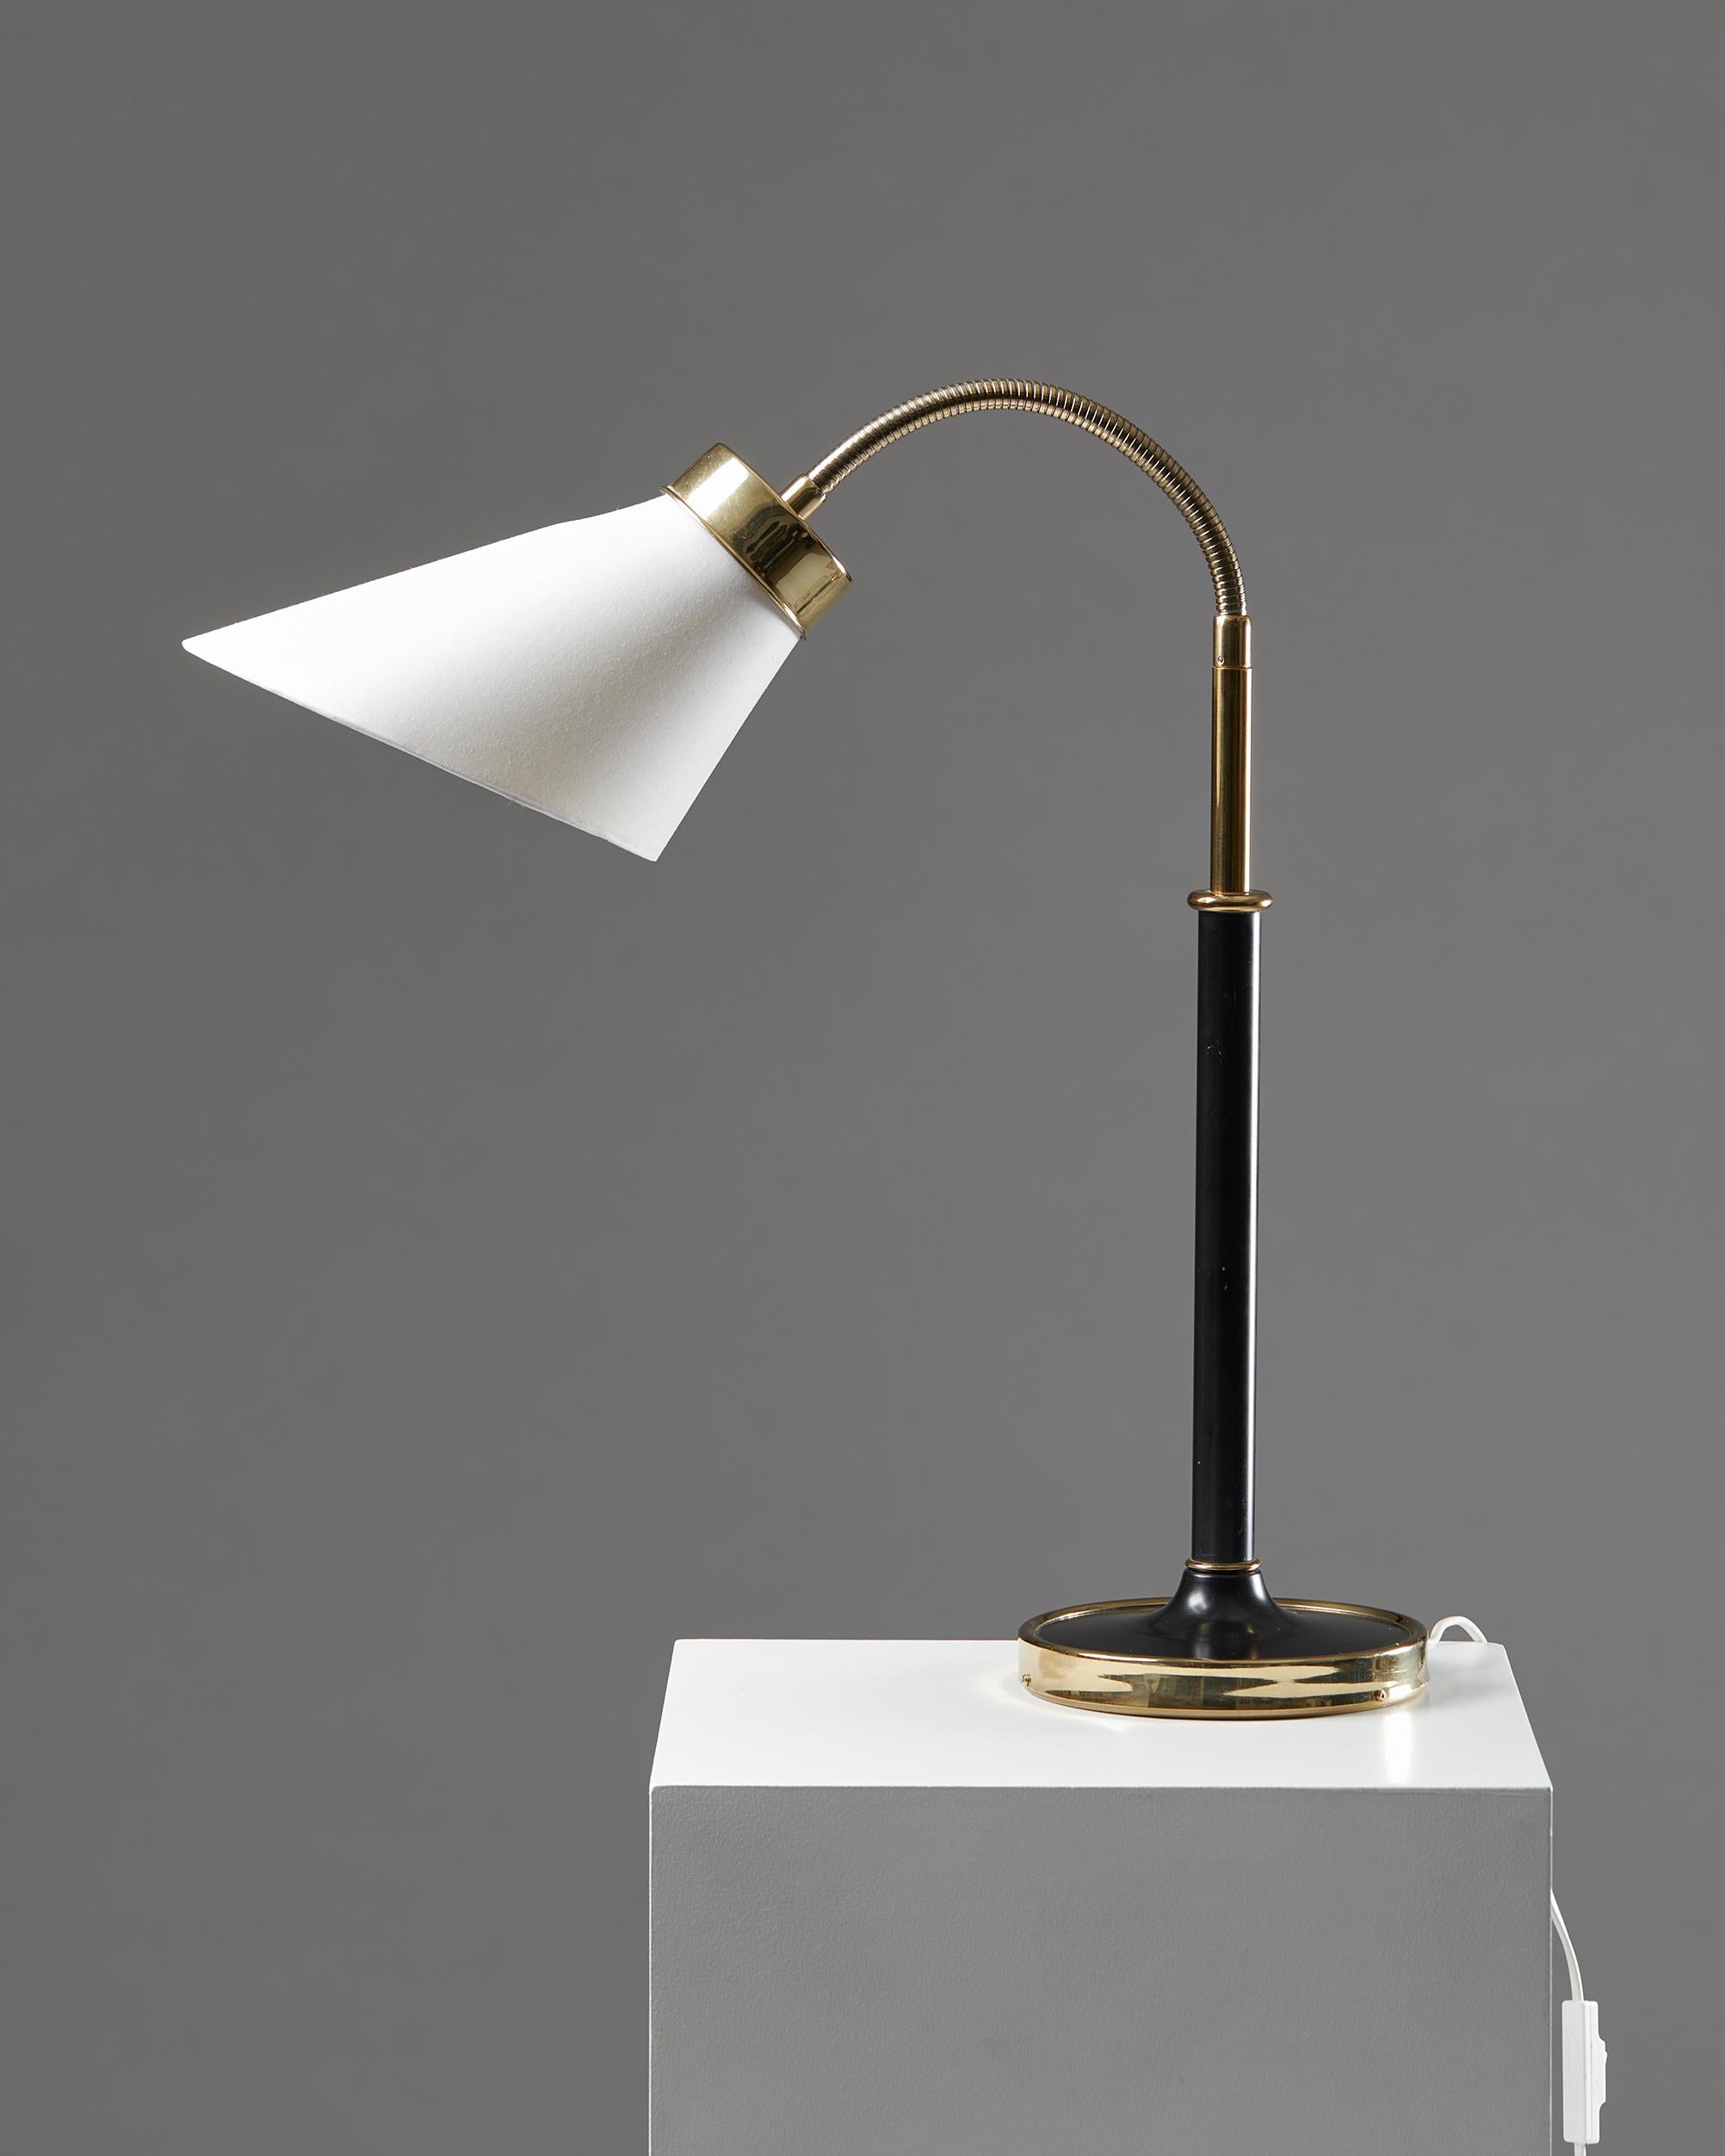 Table lamp model 2434 designed by Josef Frank for Svenskt Tenn,
Sweden, 1939.

Polished and lacquered brass with fabric shade.

Dimensions:
H: 58.5 cm / 1' 11